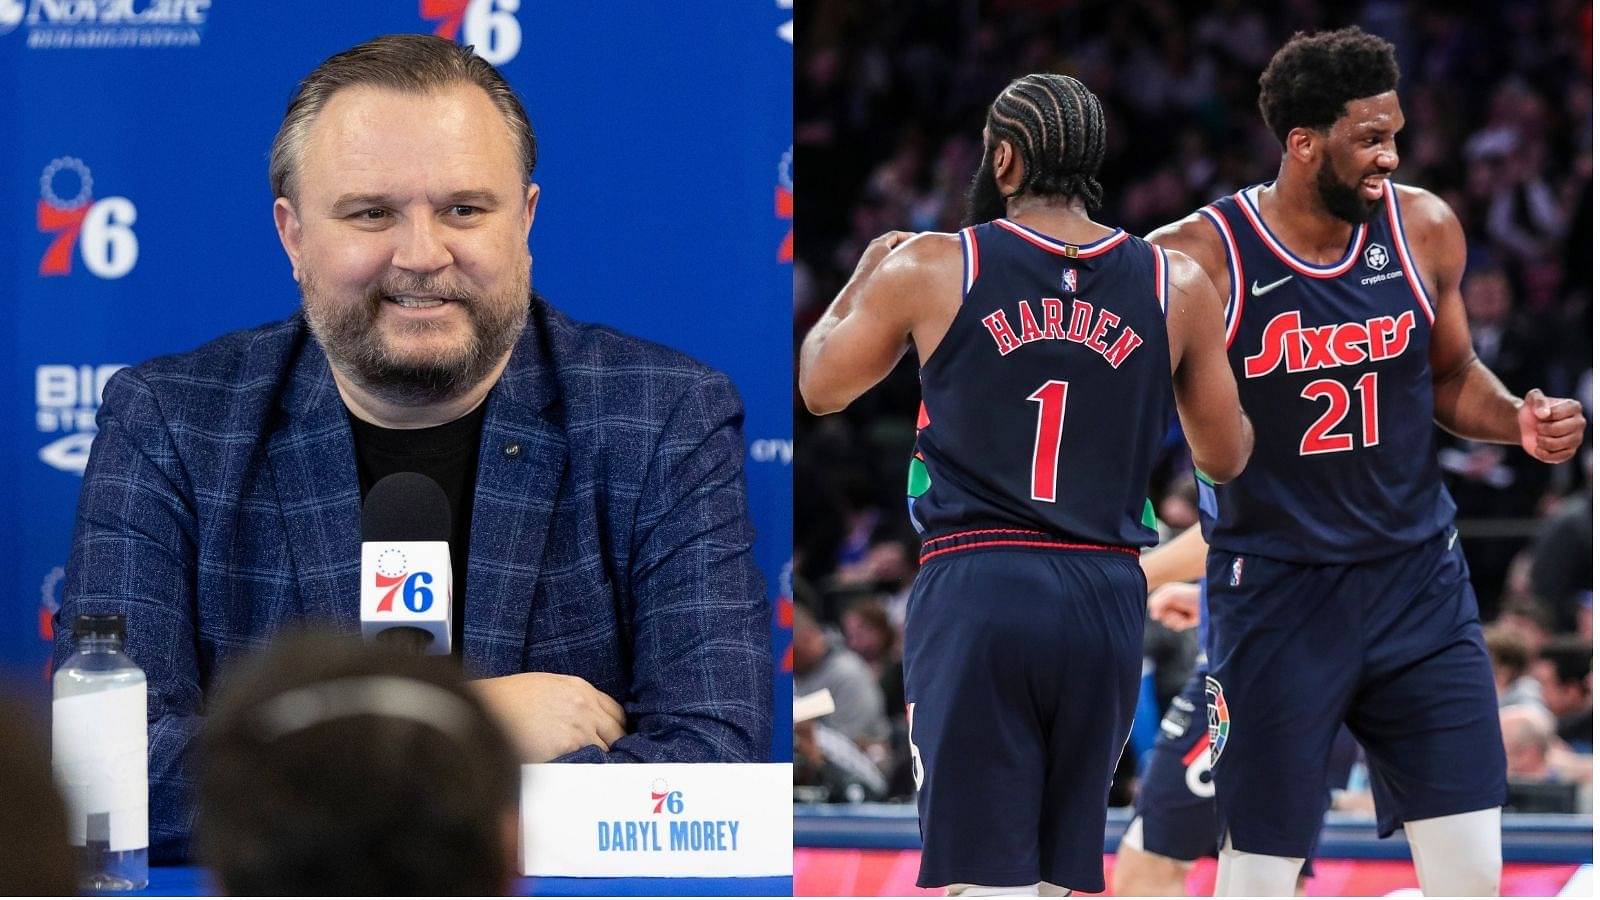 "Joel Embiid and James Harden are fouled because other teams cannot stop them!": Daryl Morey destroys Ty Lue and the Clippers says their offense would rank 30th without free throws